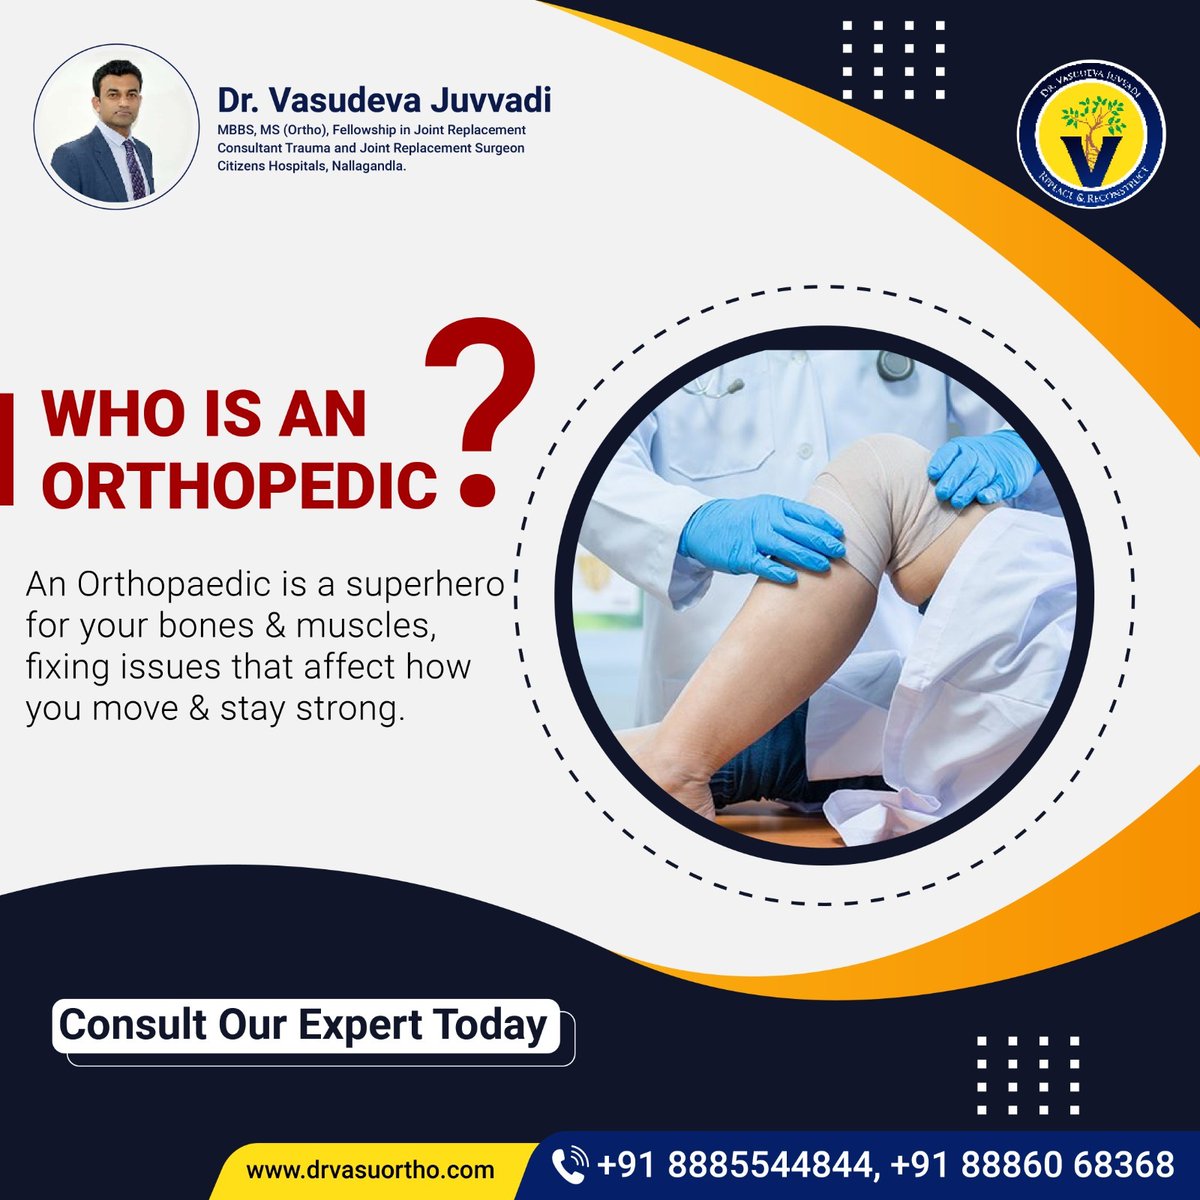 Are you tired of living with constant pain or limited mobility? Meet our hero, Dr Vasudeva Juvvadi, your orthopaedic superhero! Whether it's aching joints, a sports injury, or a condition affecting your bones and muscles, 

#OrthopedicExpert #OrthopedicCare #orthopaedics